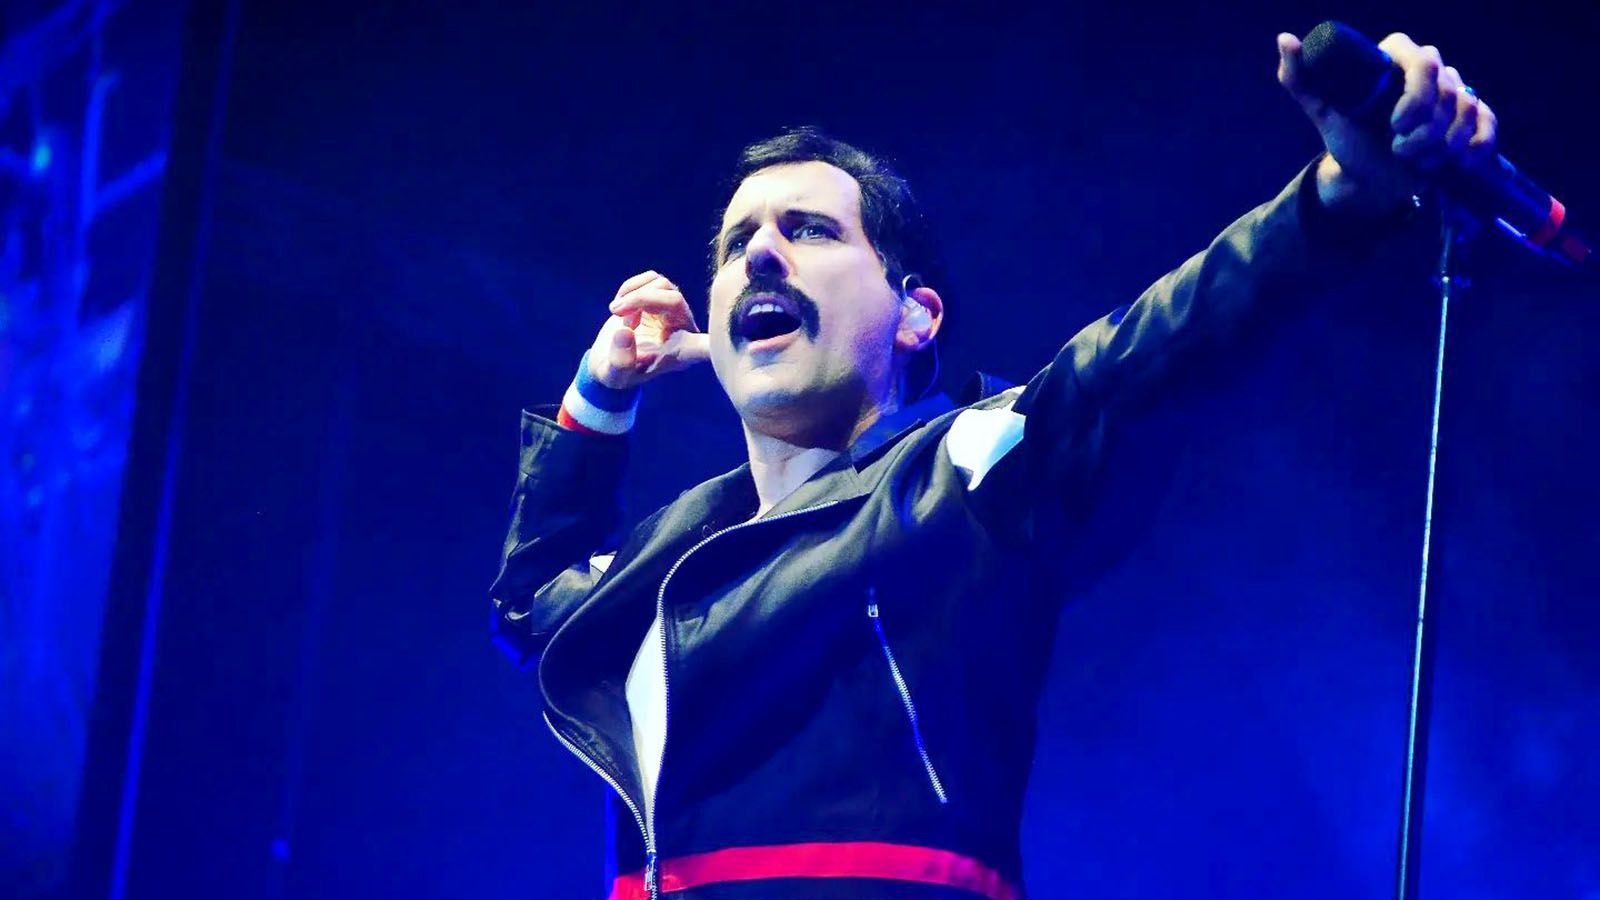 Killer Queen: A Tribute to Queen, fronted by Patrick Myers, will stop at The Clyde Theatre on July 25.